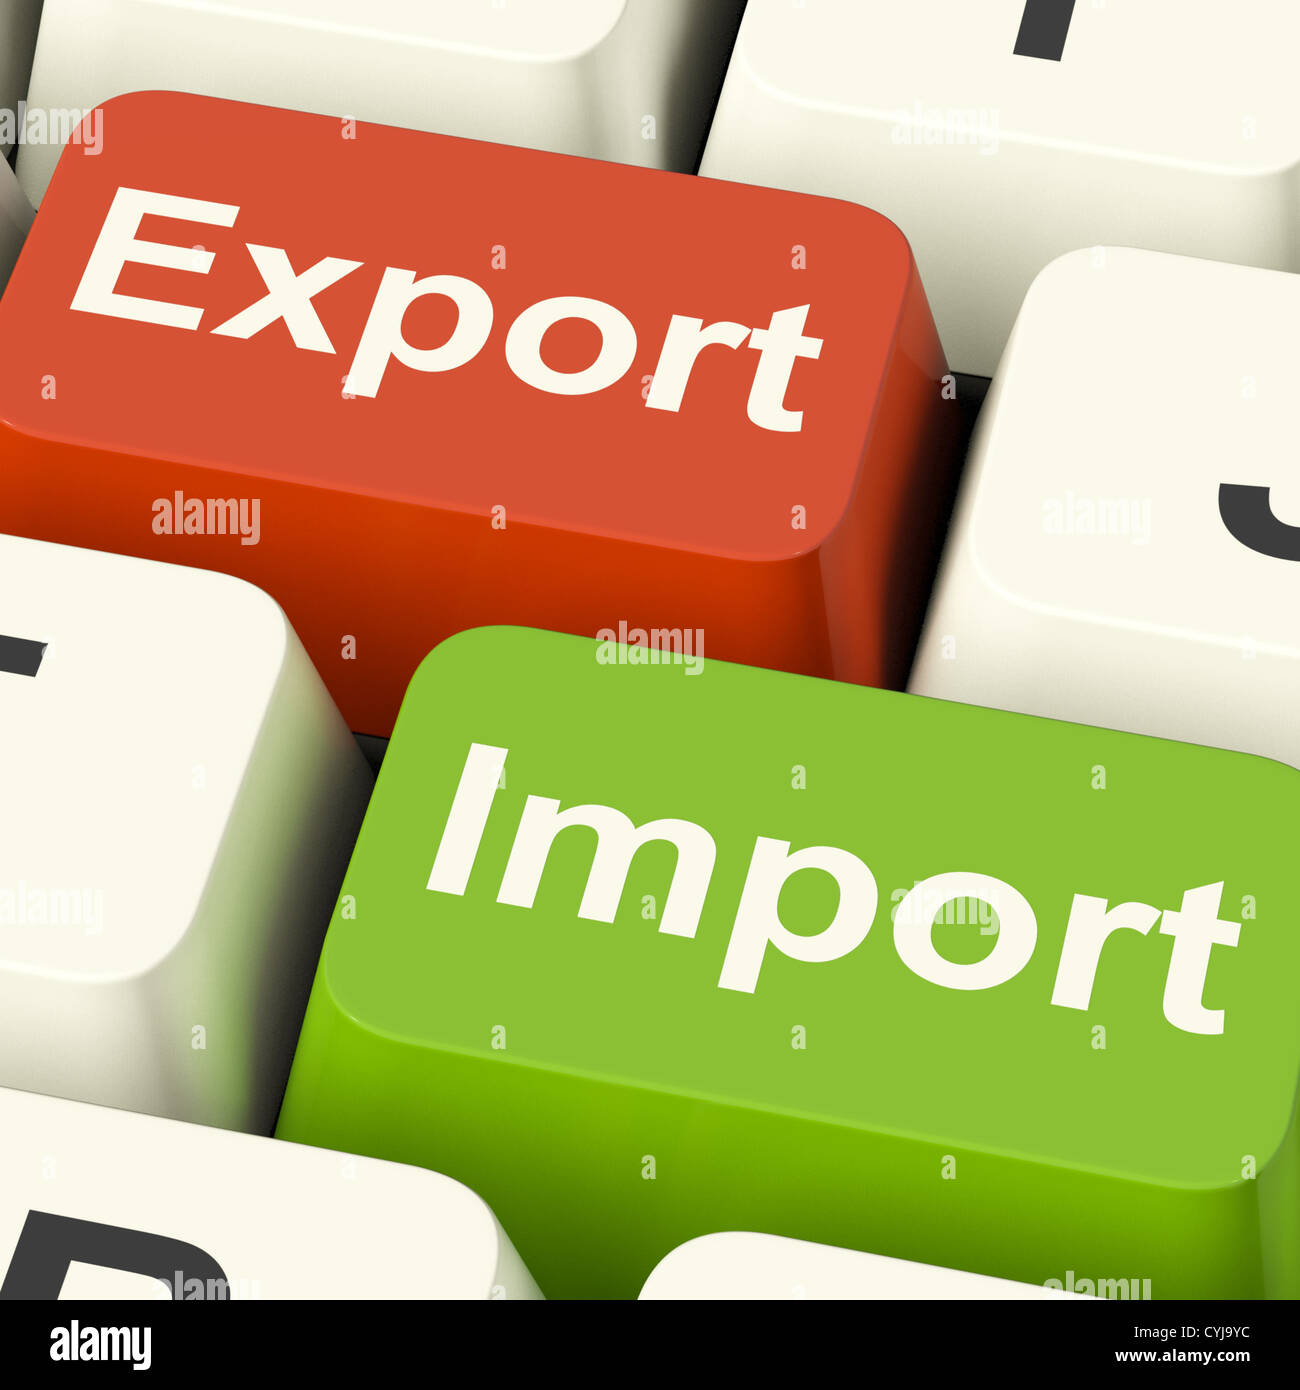 Export And Import Keys Shows International Trade Or Global Commerce Stock Photo